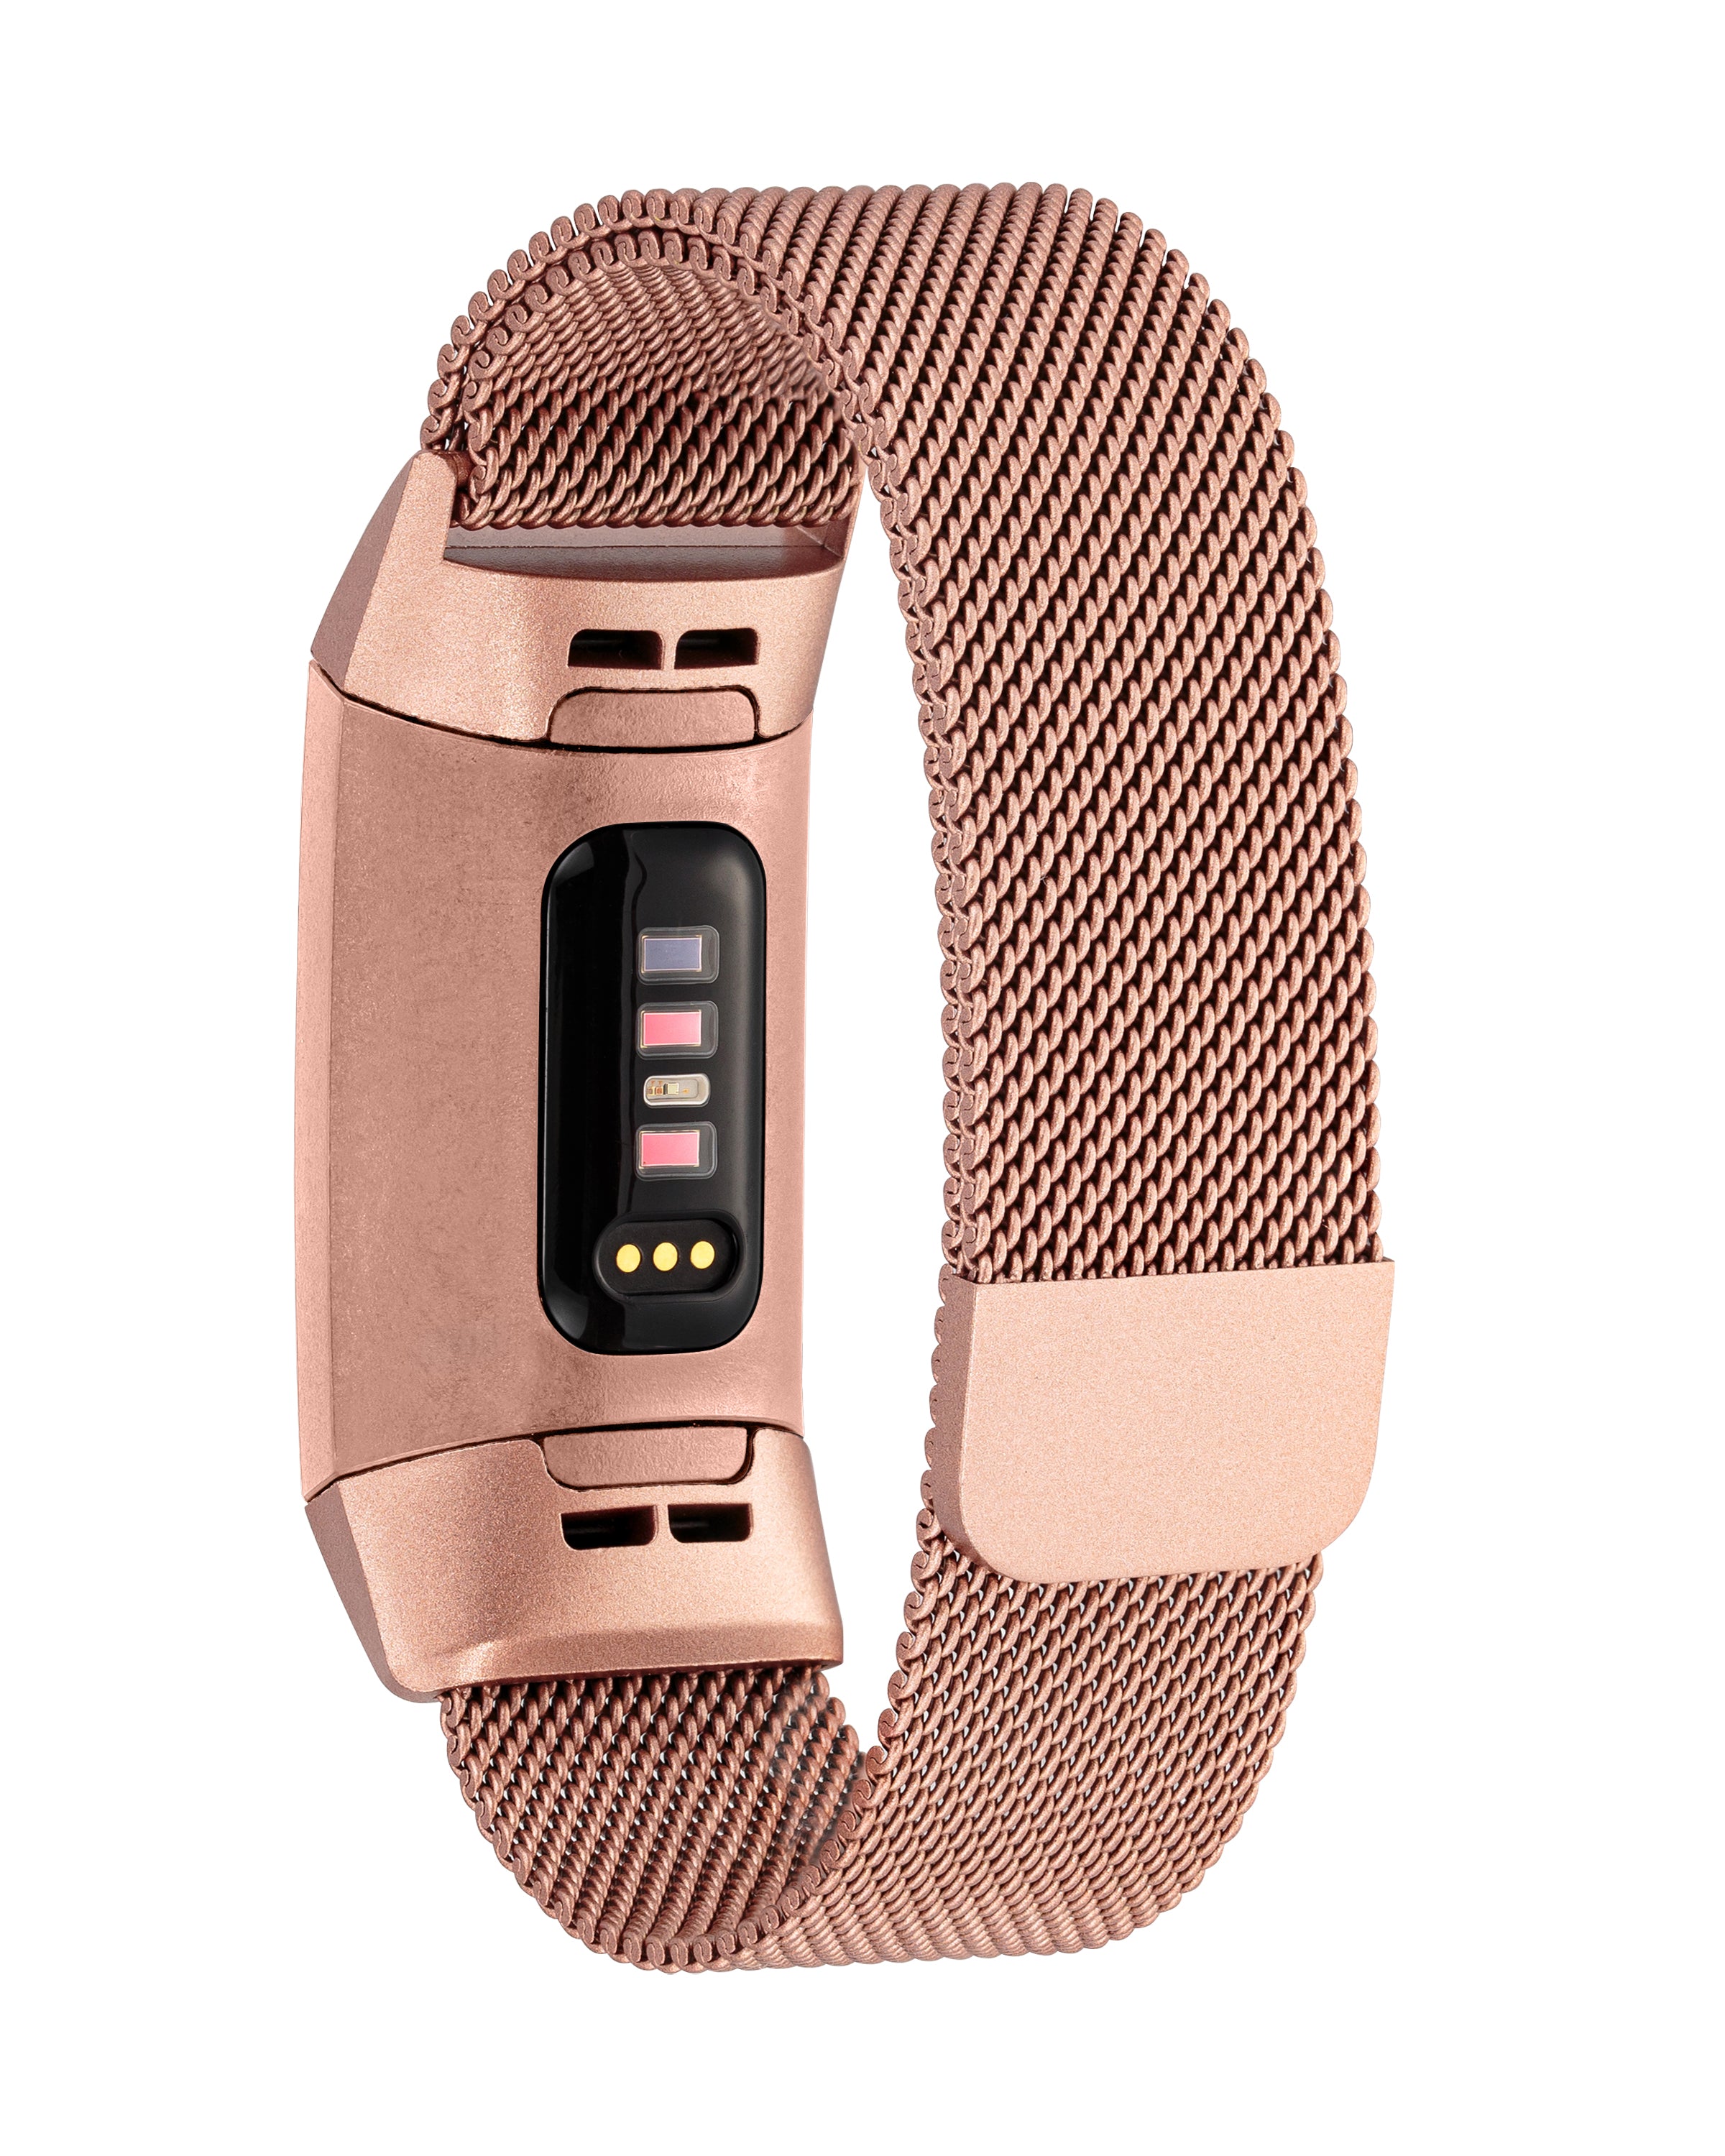 ZWGKKYGYH Bands Compatible with Fitbit Charge 4 and Charge 3 for Women Men,  Stainless Steel Metal Mesh Magnetic Band Replacement Accessories Bracelet